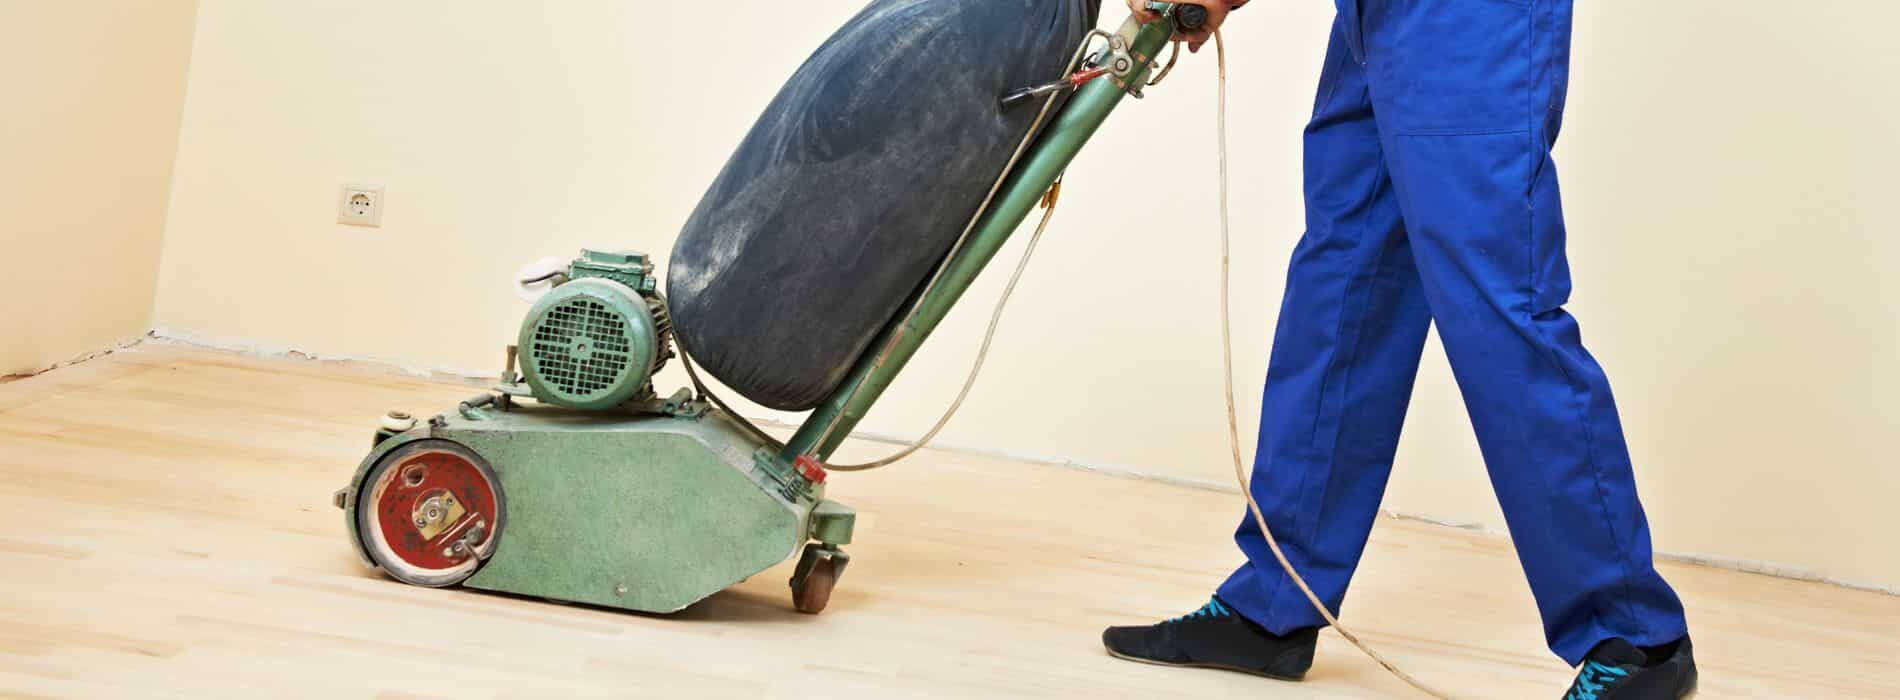 An individual operates a floor sanding machine with a 551mm dust sheet and 60-grit sandpaper, expertly restoring a 90mm solid oak strip floor in RG20.